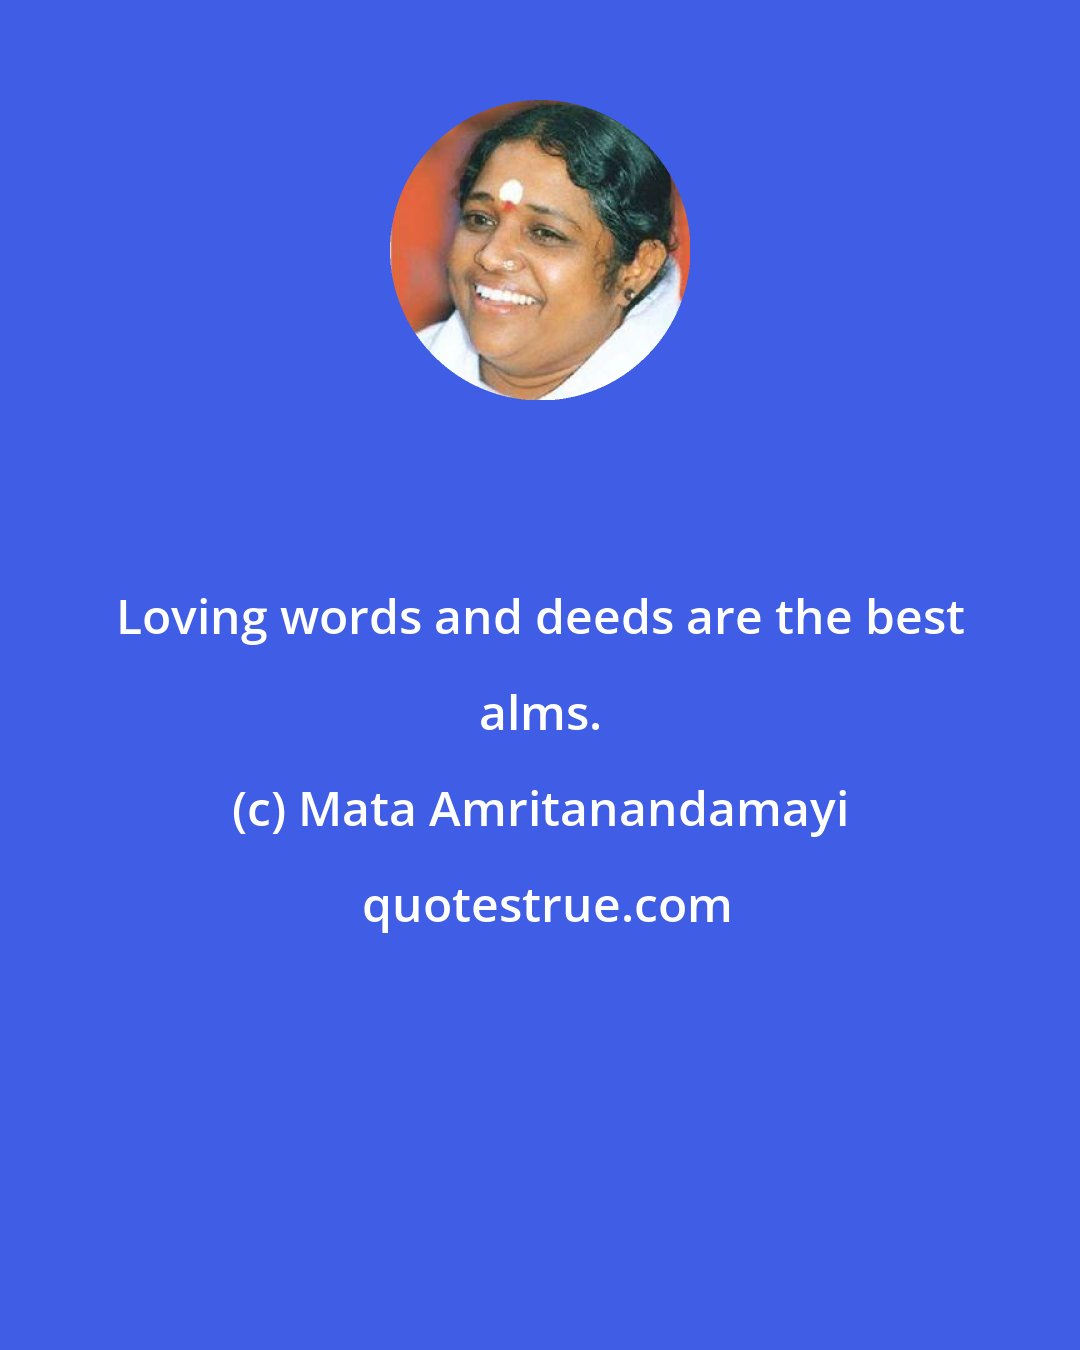 Mata Amritanandamayi: Loving words and deeds are the best alms.